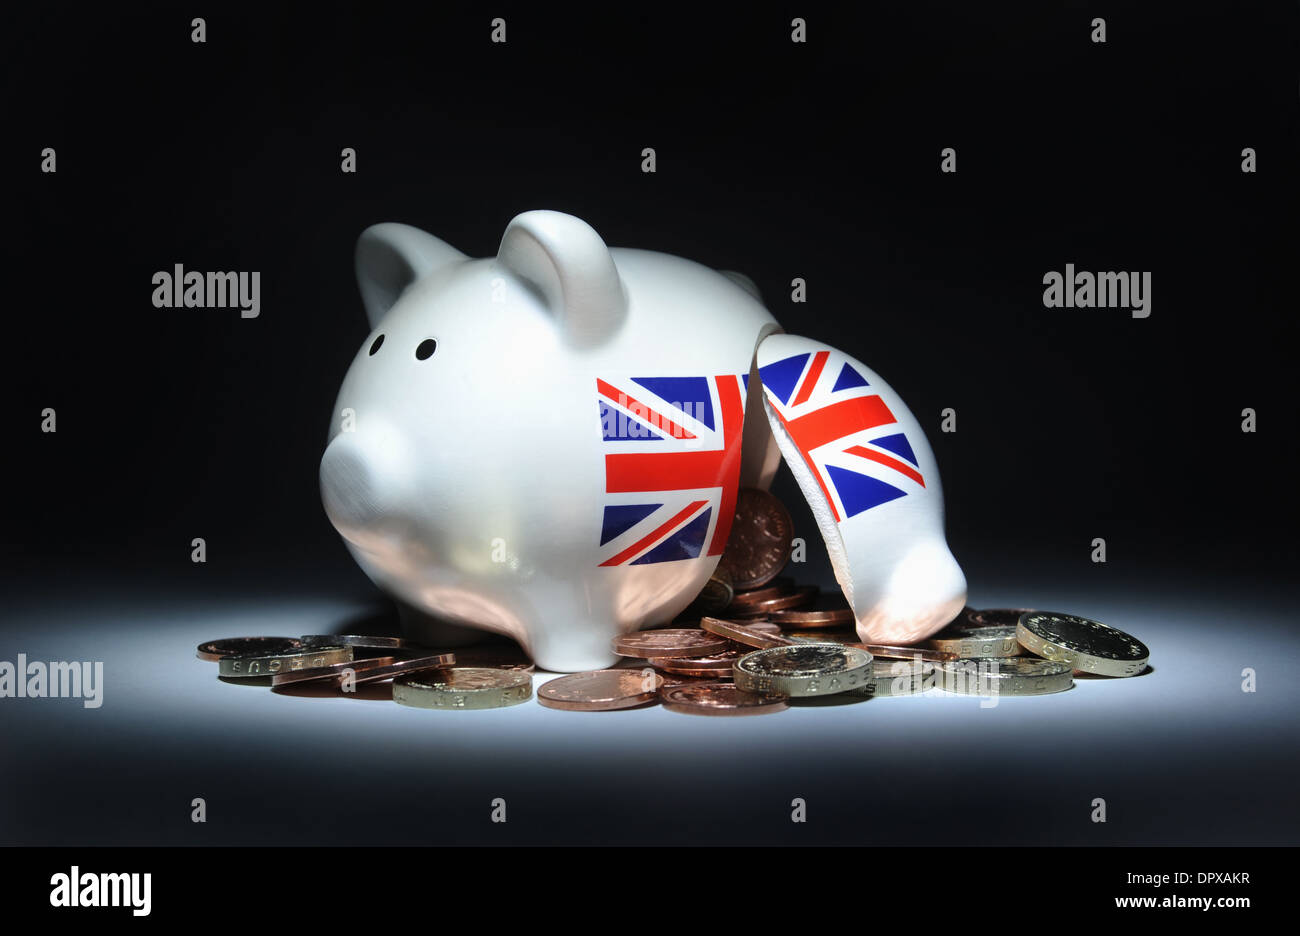 BROKEN BRITISH PIGGY BANK SPILLING COINS RE THE ECONOMY UNION JACK SAVINGS INCOMES WAGES INFLATION HOUSEHOLD BUDGETS MONEY POUND Stock Photo